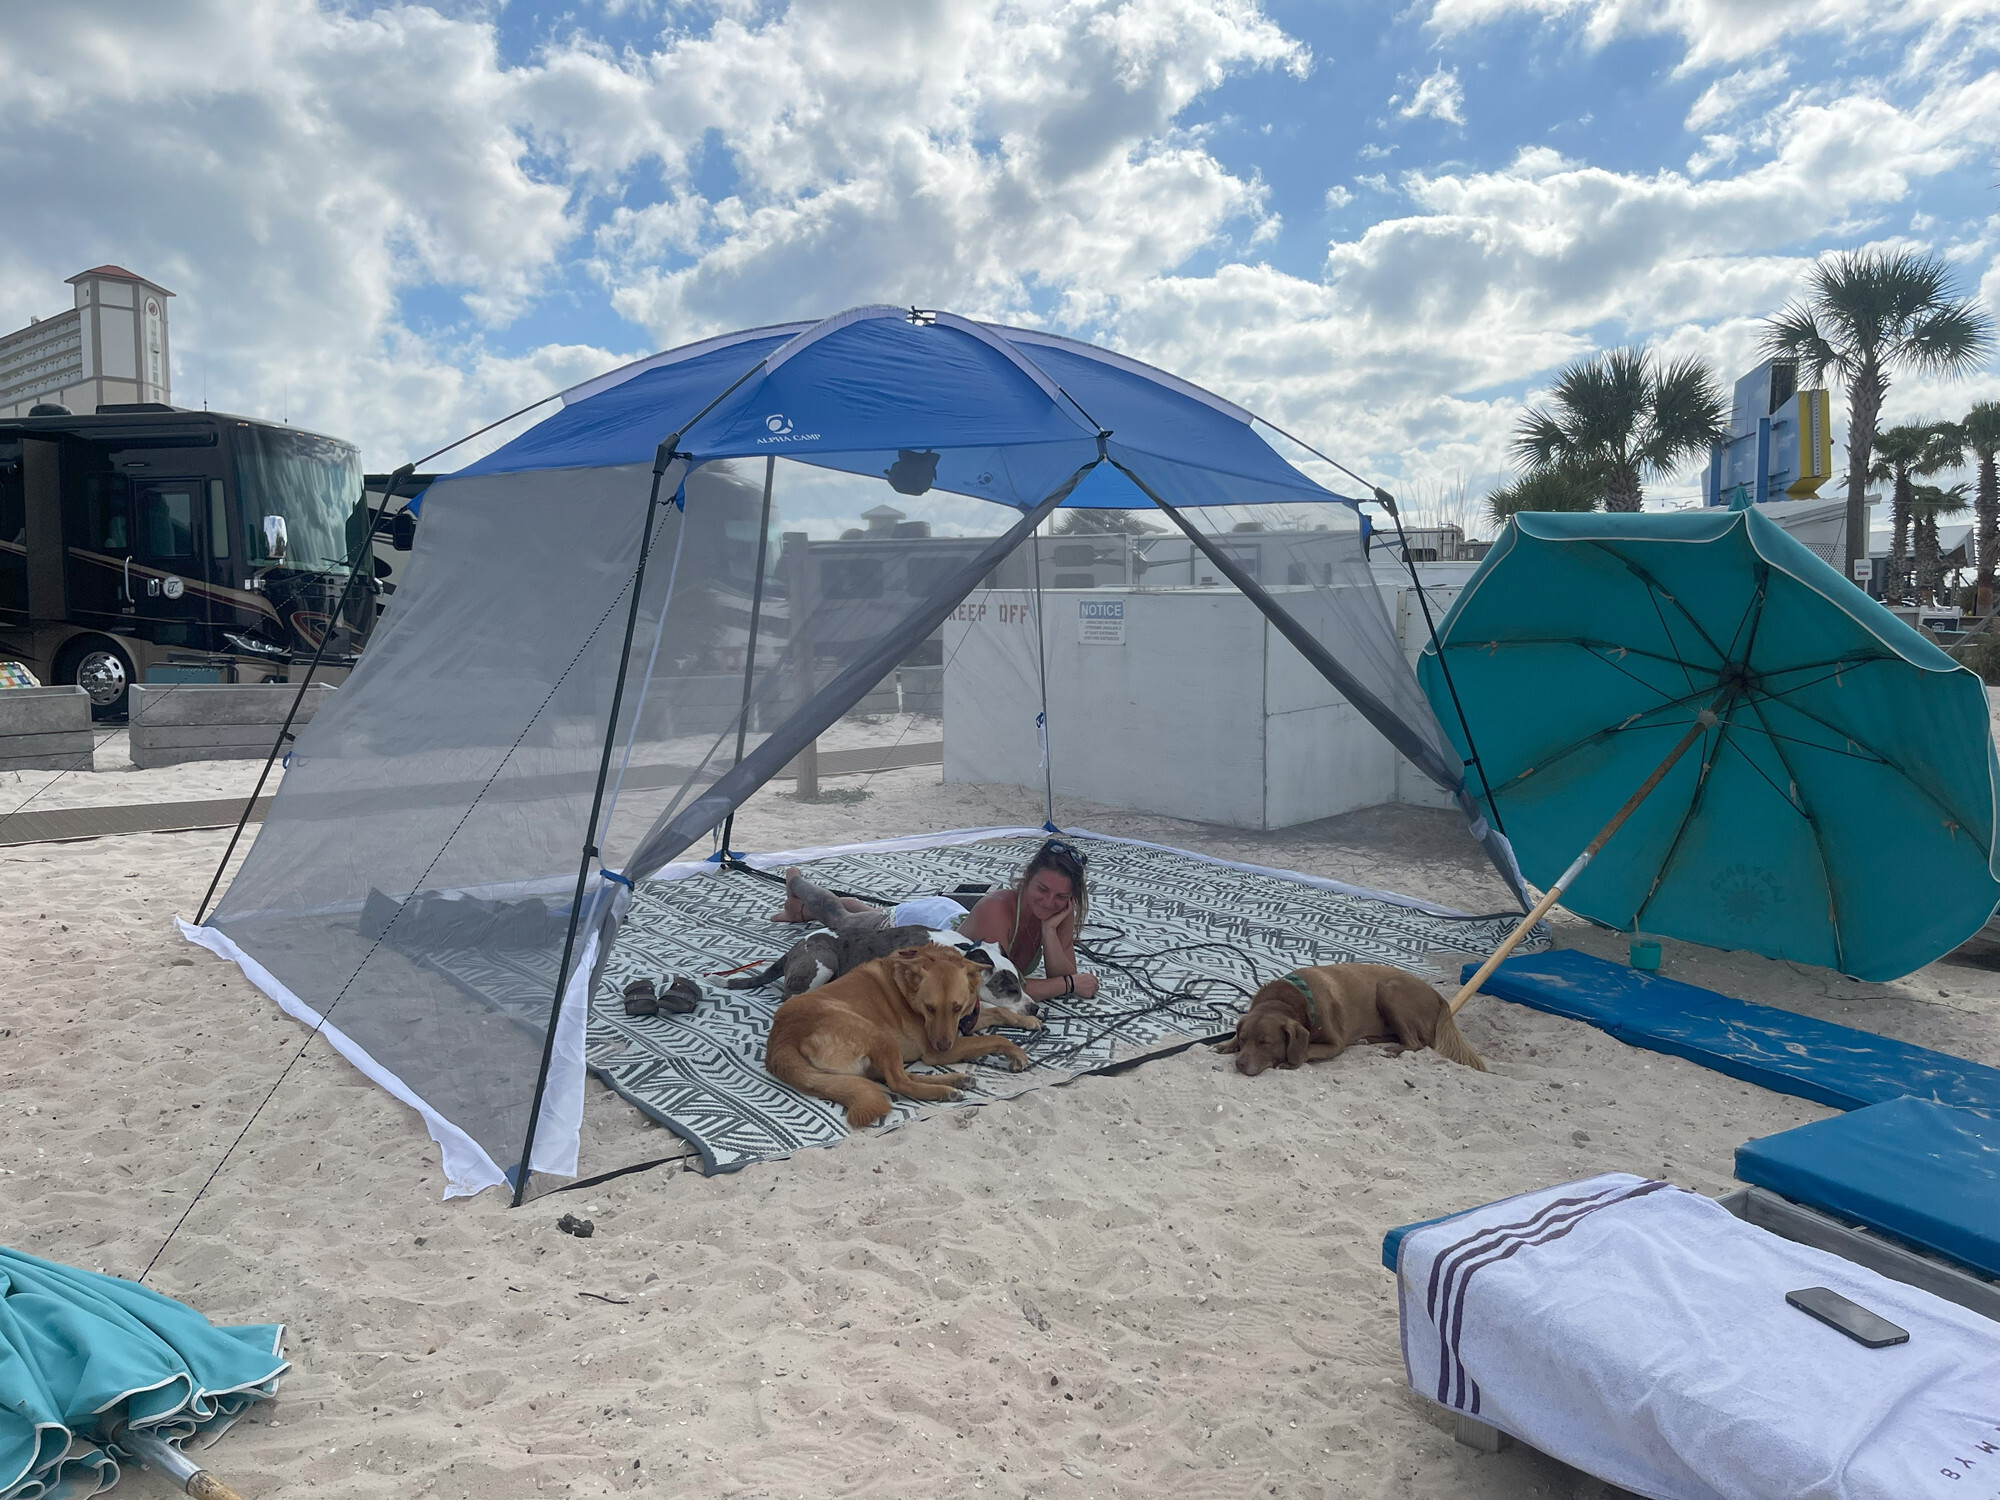 Alpha Camper 13' x 9' Screen House Canopy Sun Shade with One Room, Blue - image 2 of 9